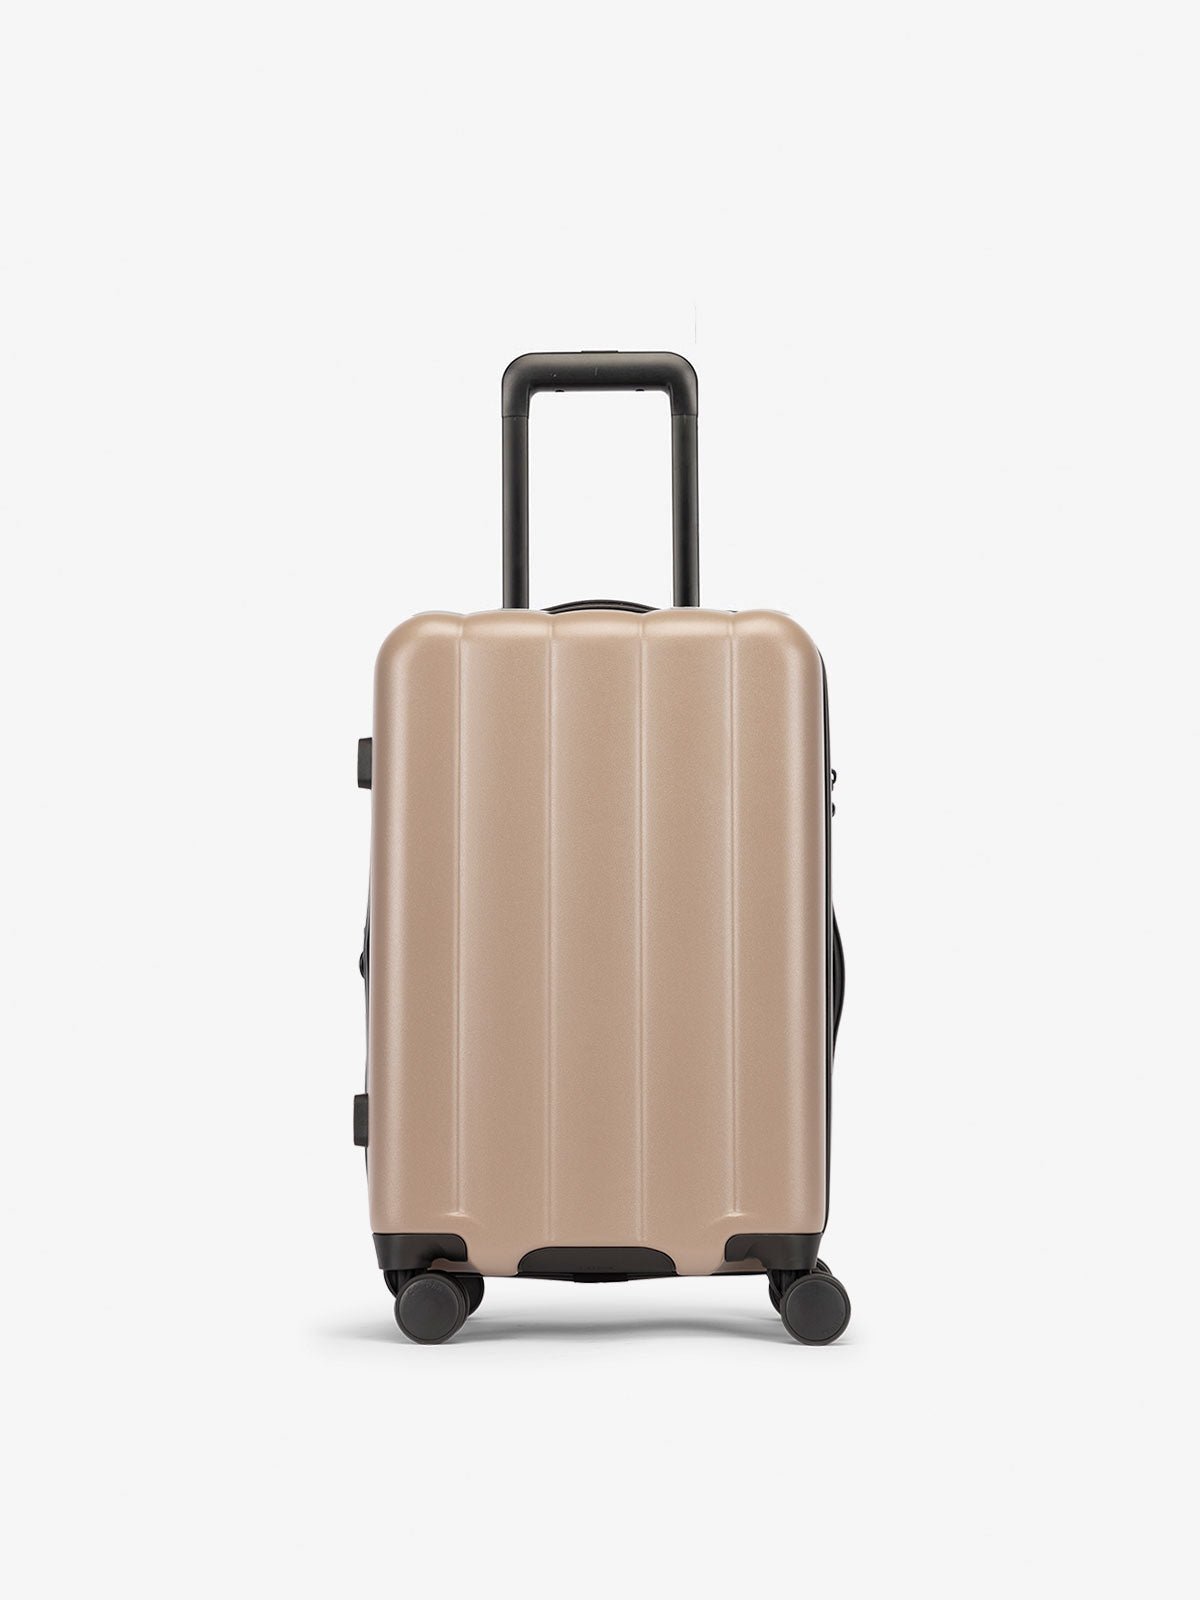 Brown chocolate carry-on luggage made from an ultra-durable polycarbonate shell and expandable by up to 2"